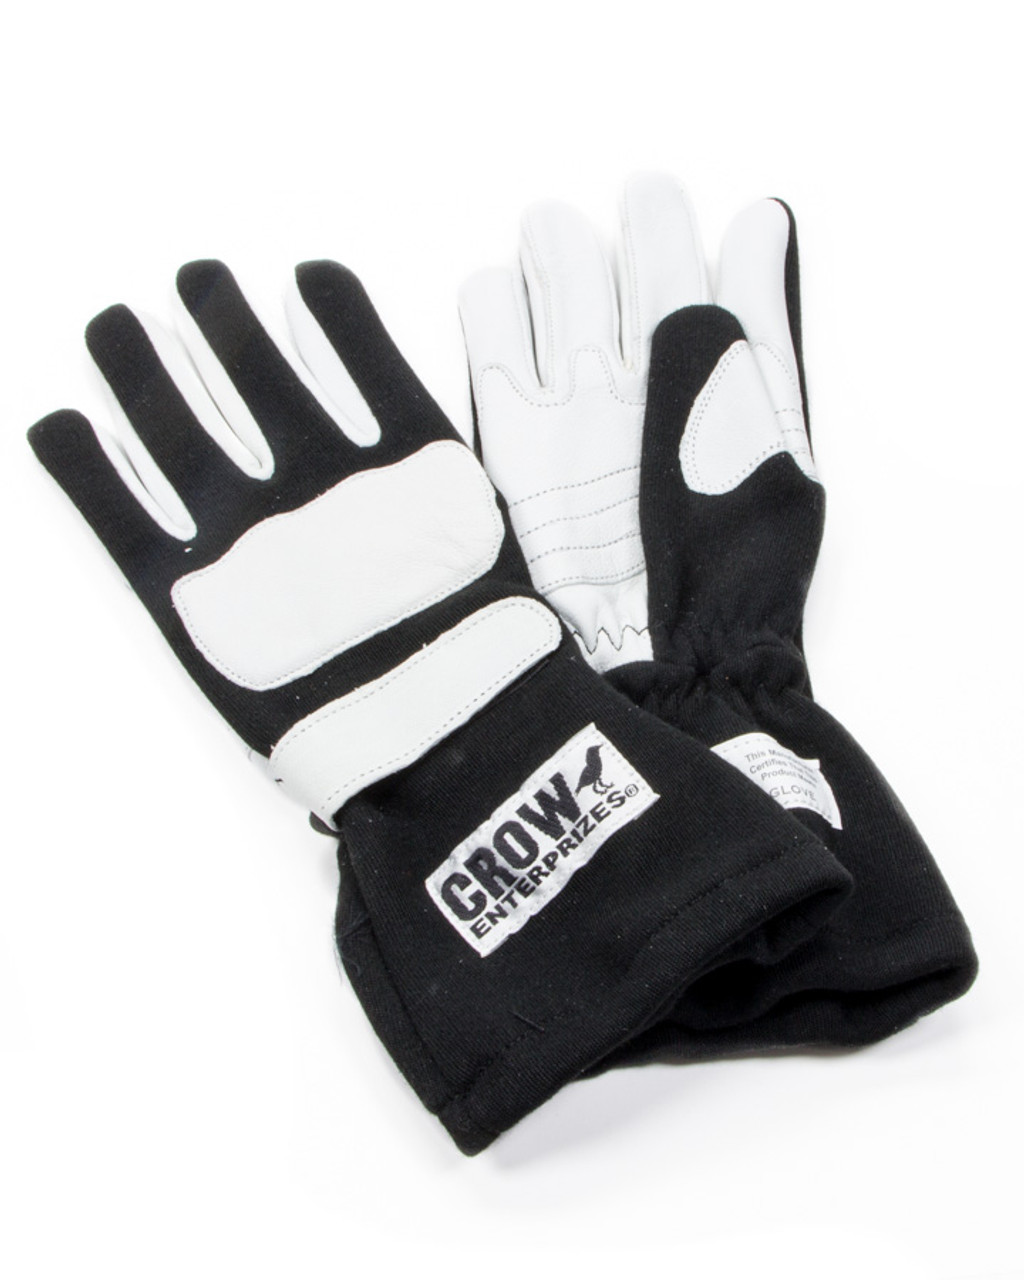 Crow Gloves Large Black Nomex 2-Layer Wings - CRW11774